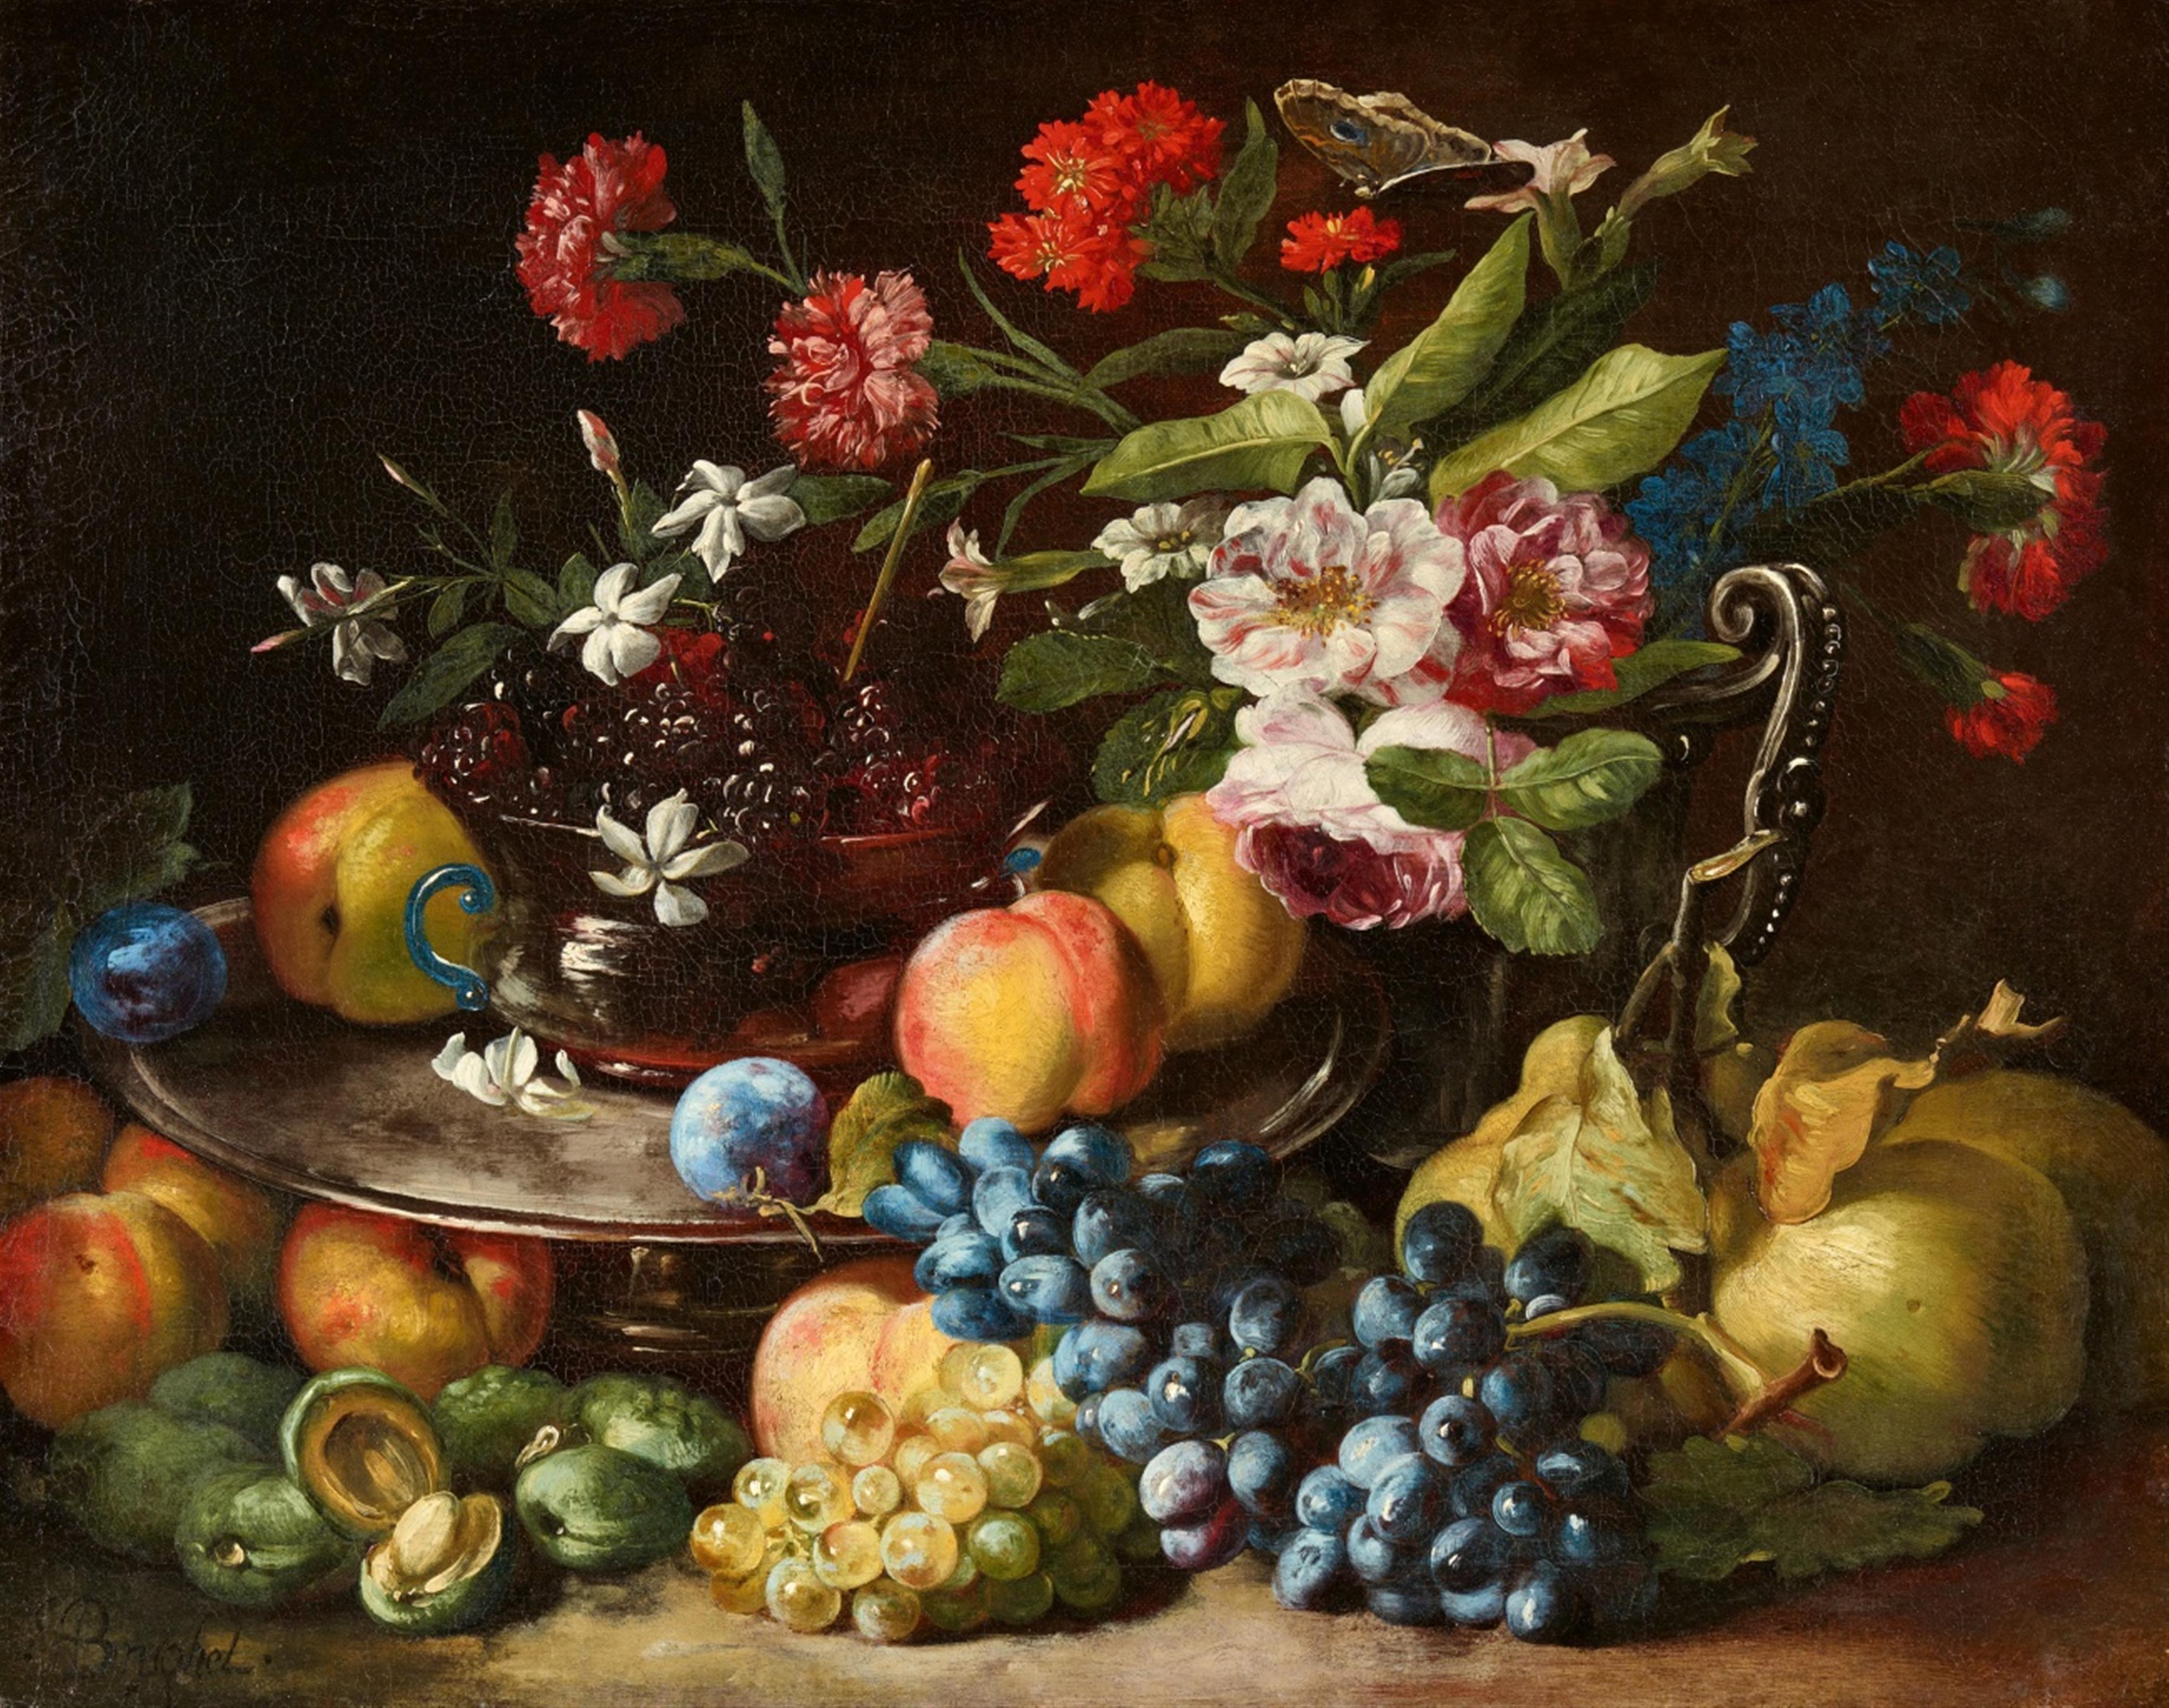 Abraham Brueghel - Still Life with Fruit and Flowers